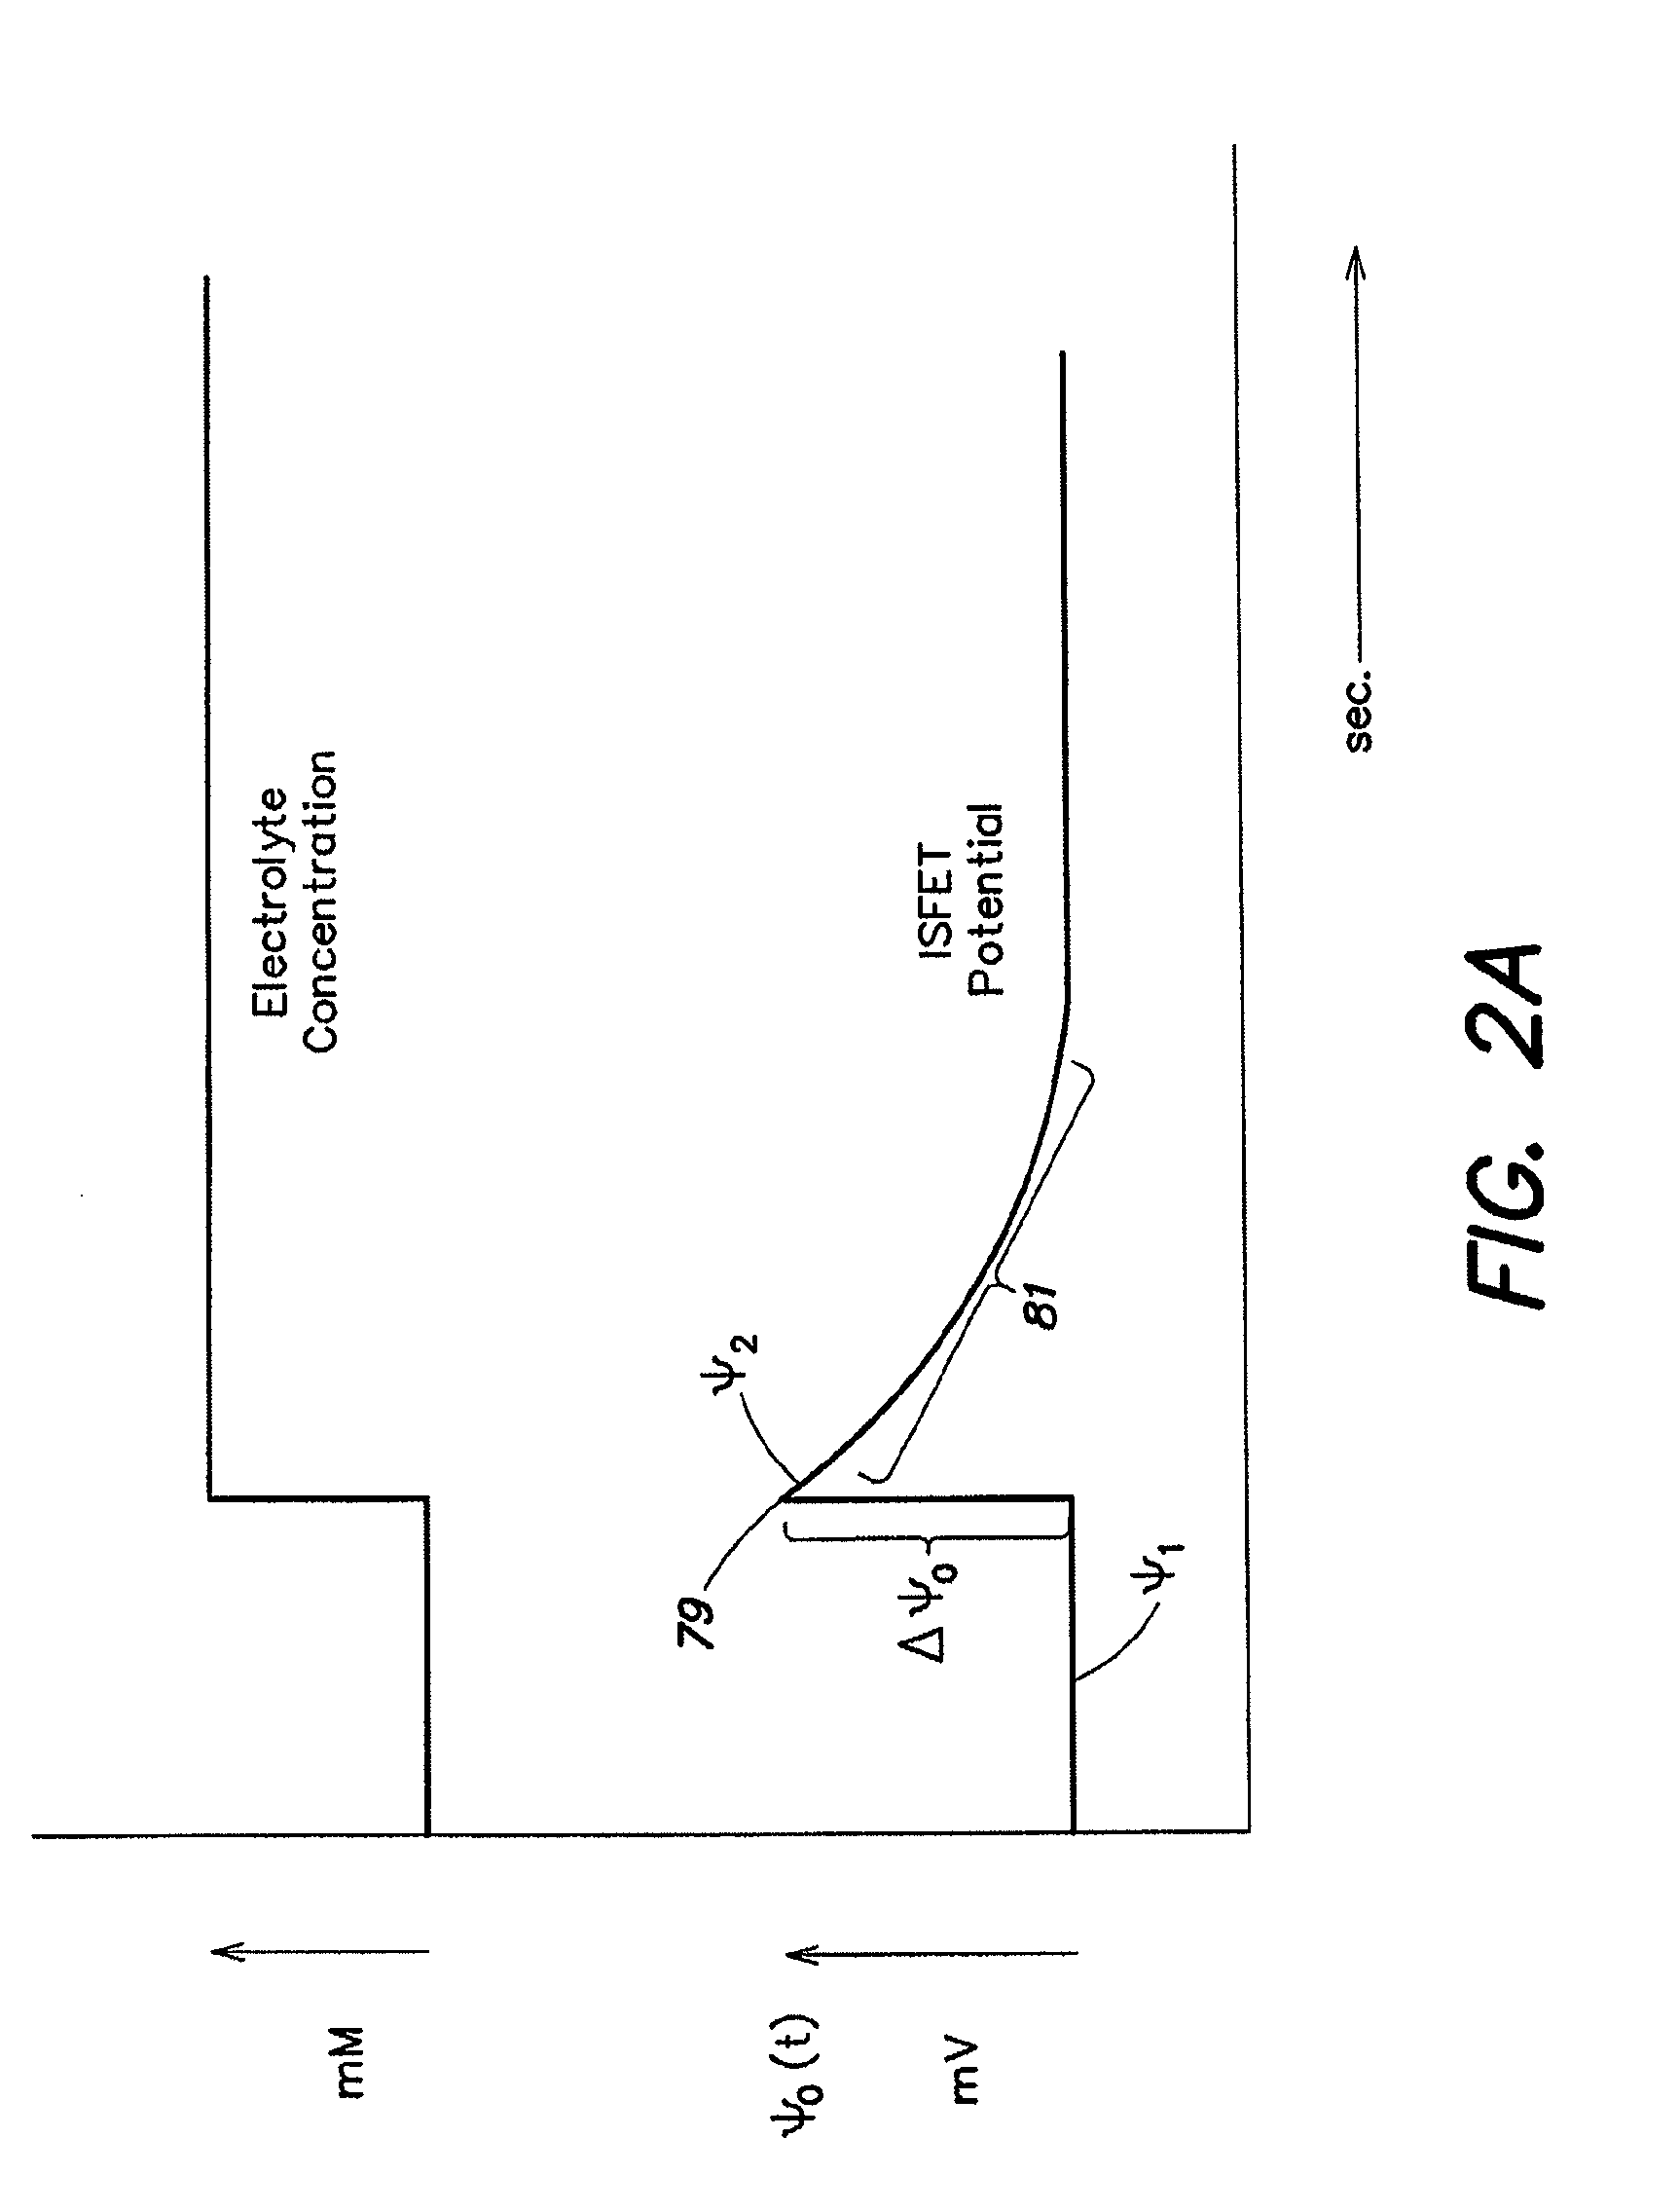 Method and Apparatus for Rapid Nucleic Acid Sequencing